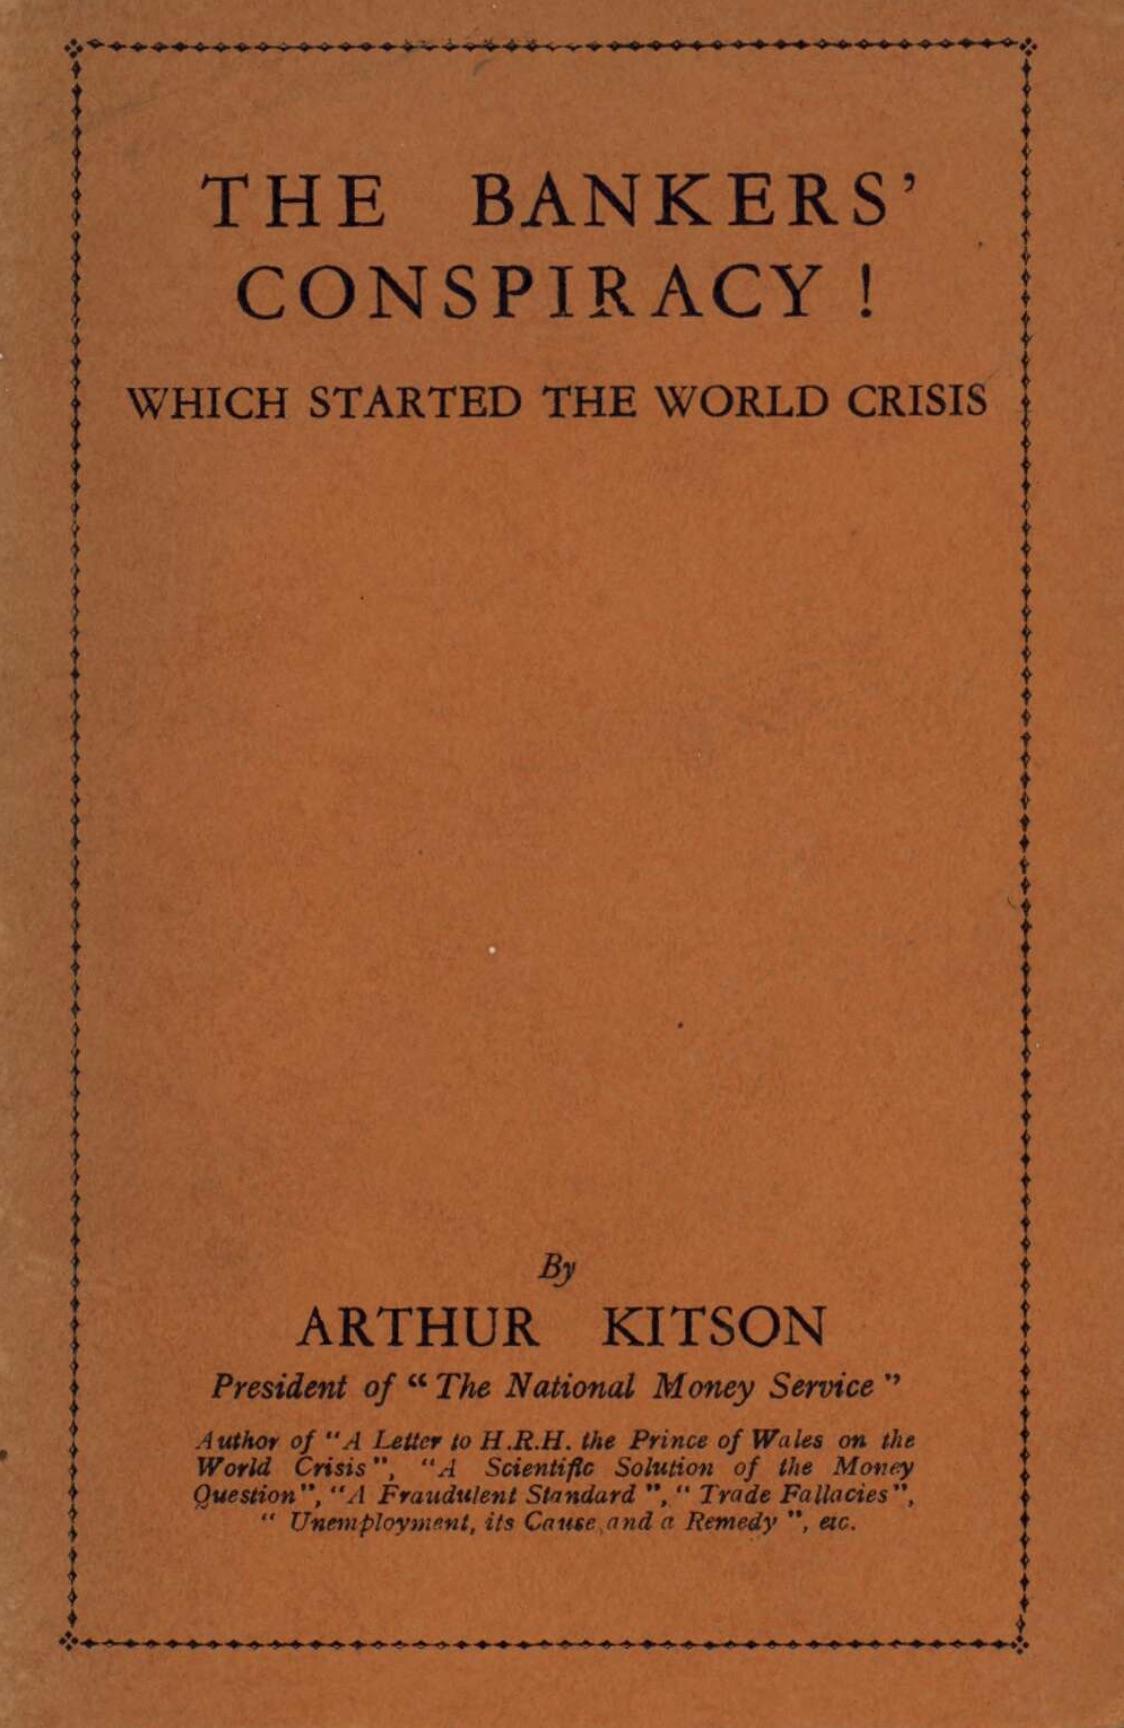 The Bankers' Conspiracy! Which Started the World Crisis (1933) by Arthur Kitson, 1860-1937